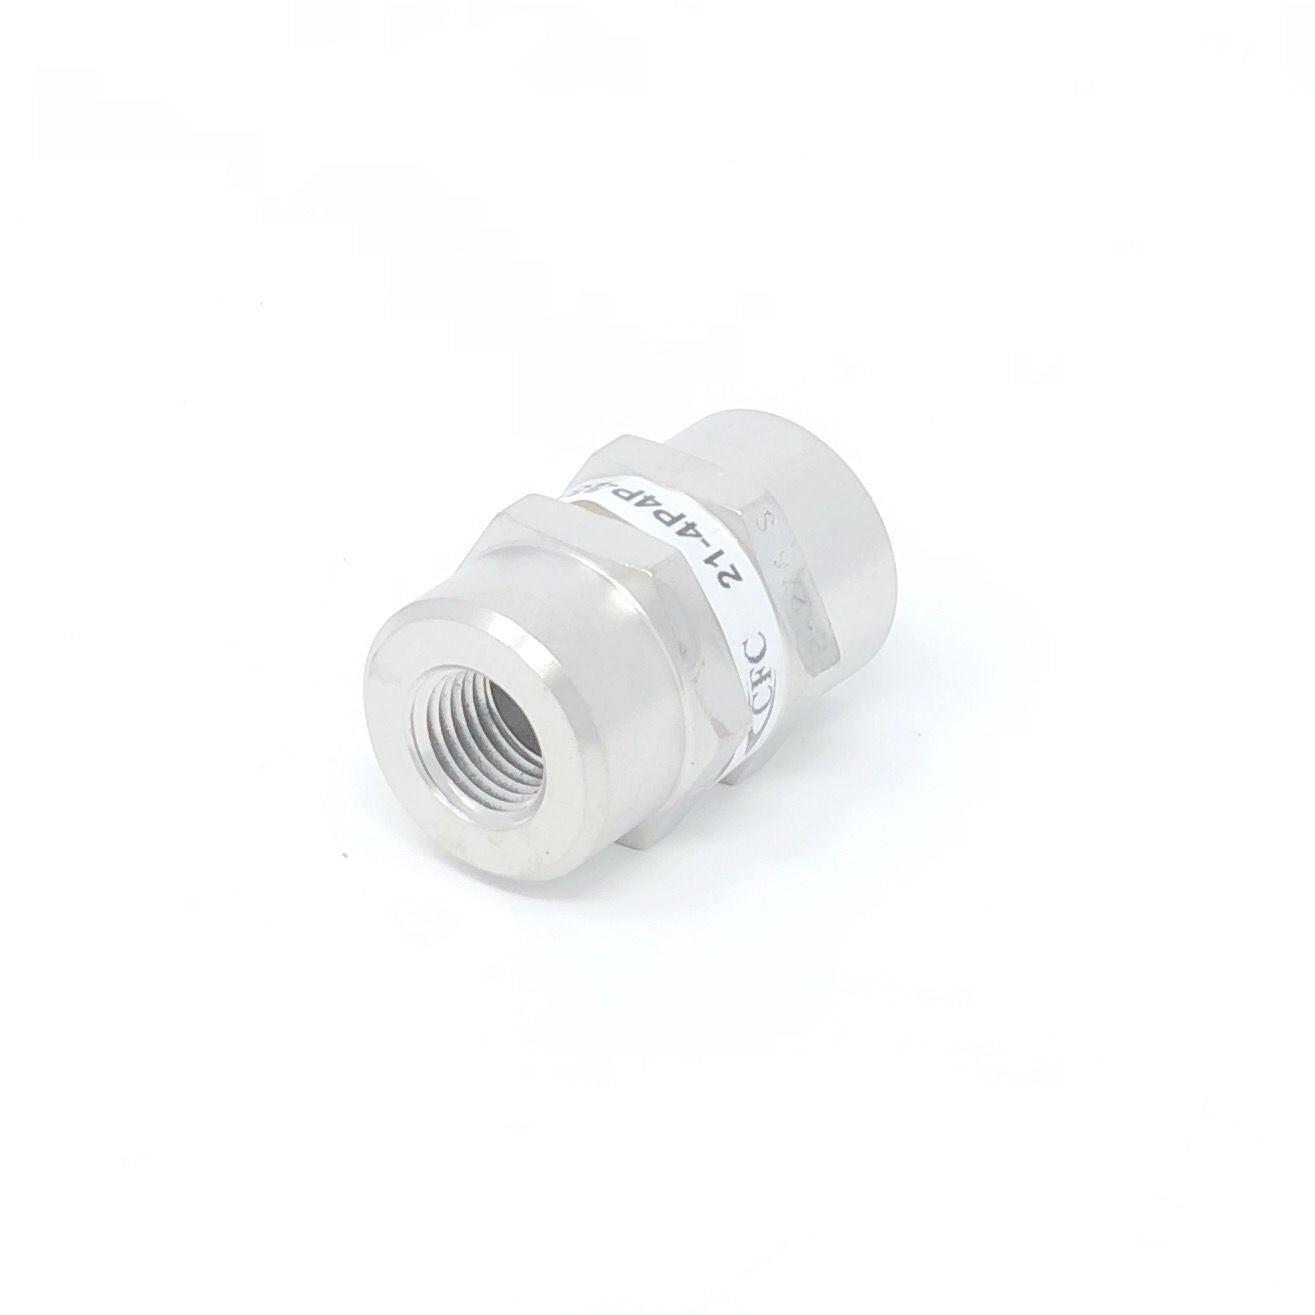 21-12N12N-40S : Chase High Pressure Inline Filter, 3000psi, 3/4" NPT, 40 Micron, No Visual Indicator, No Bypass